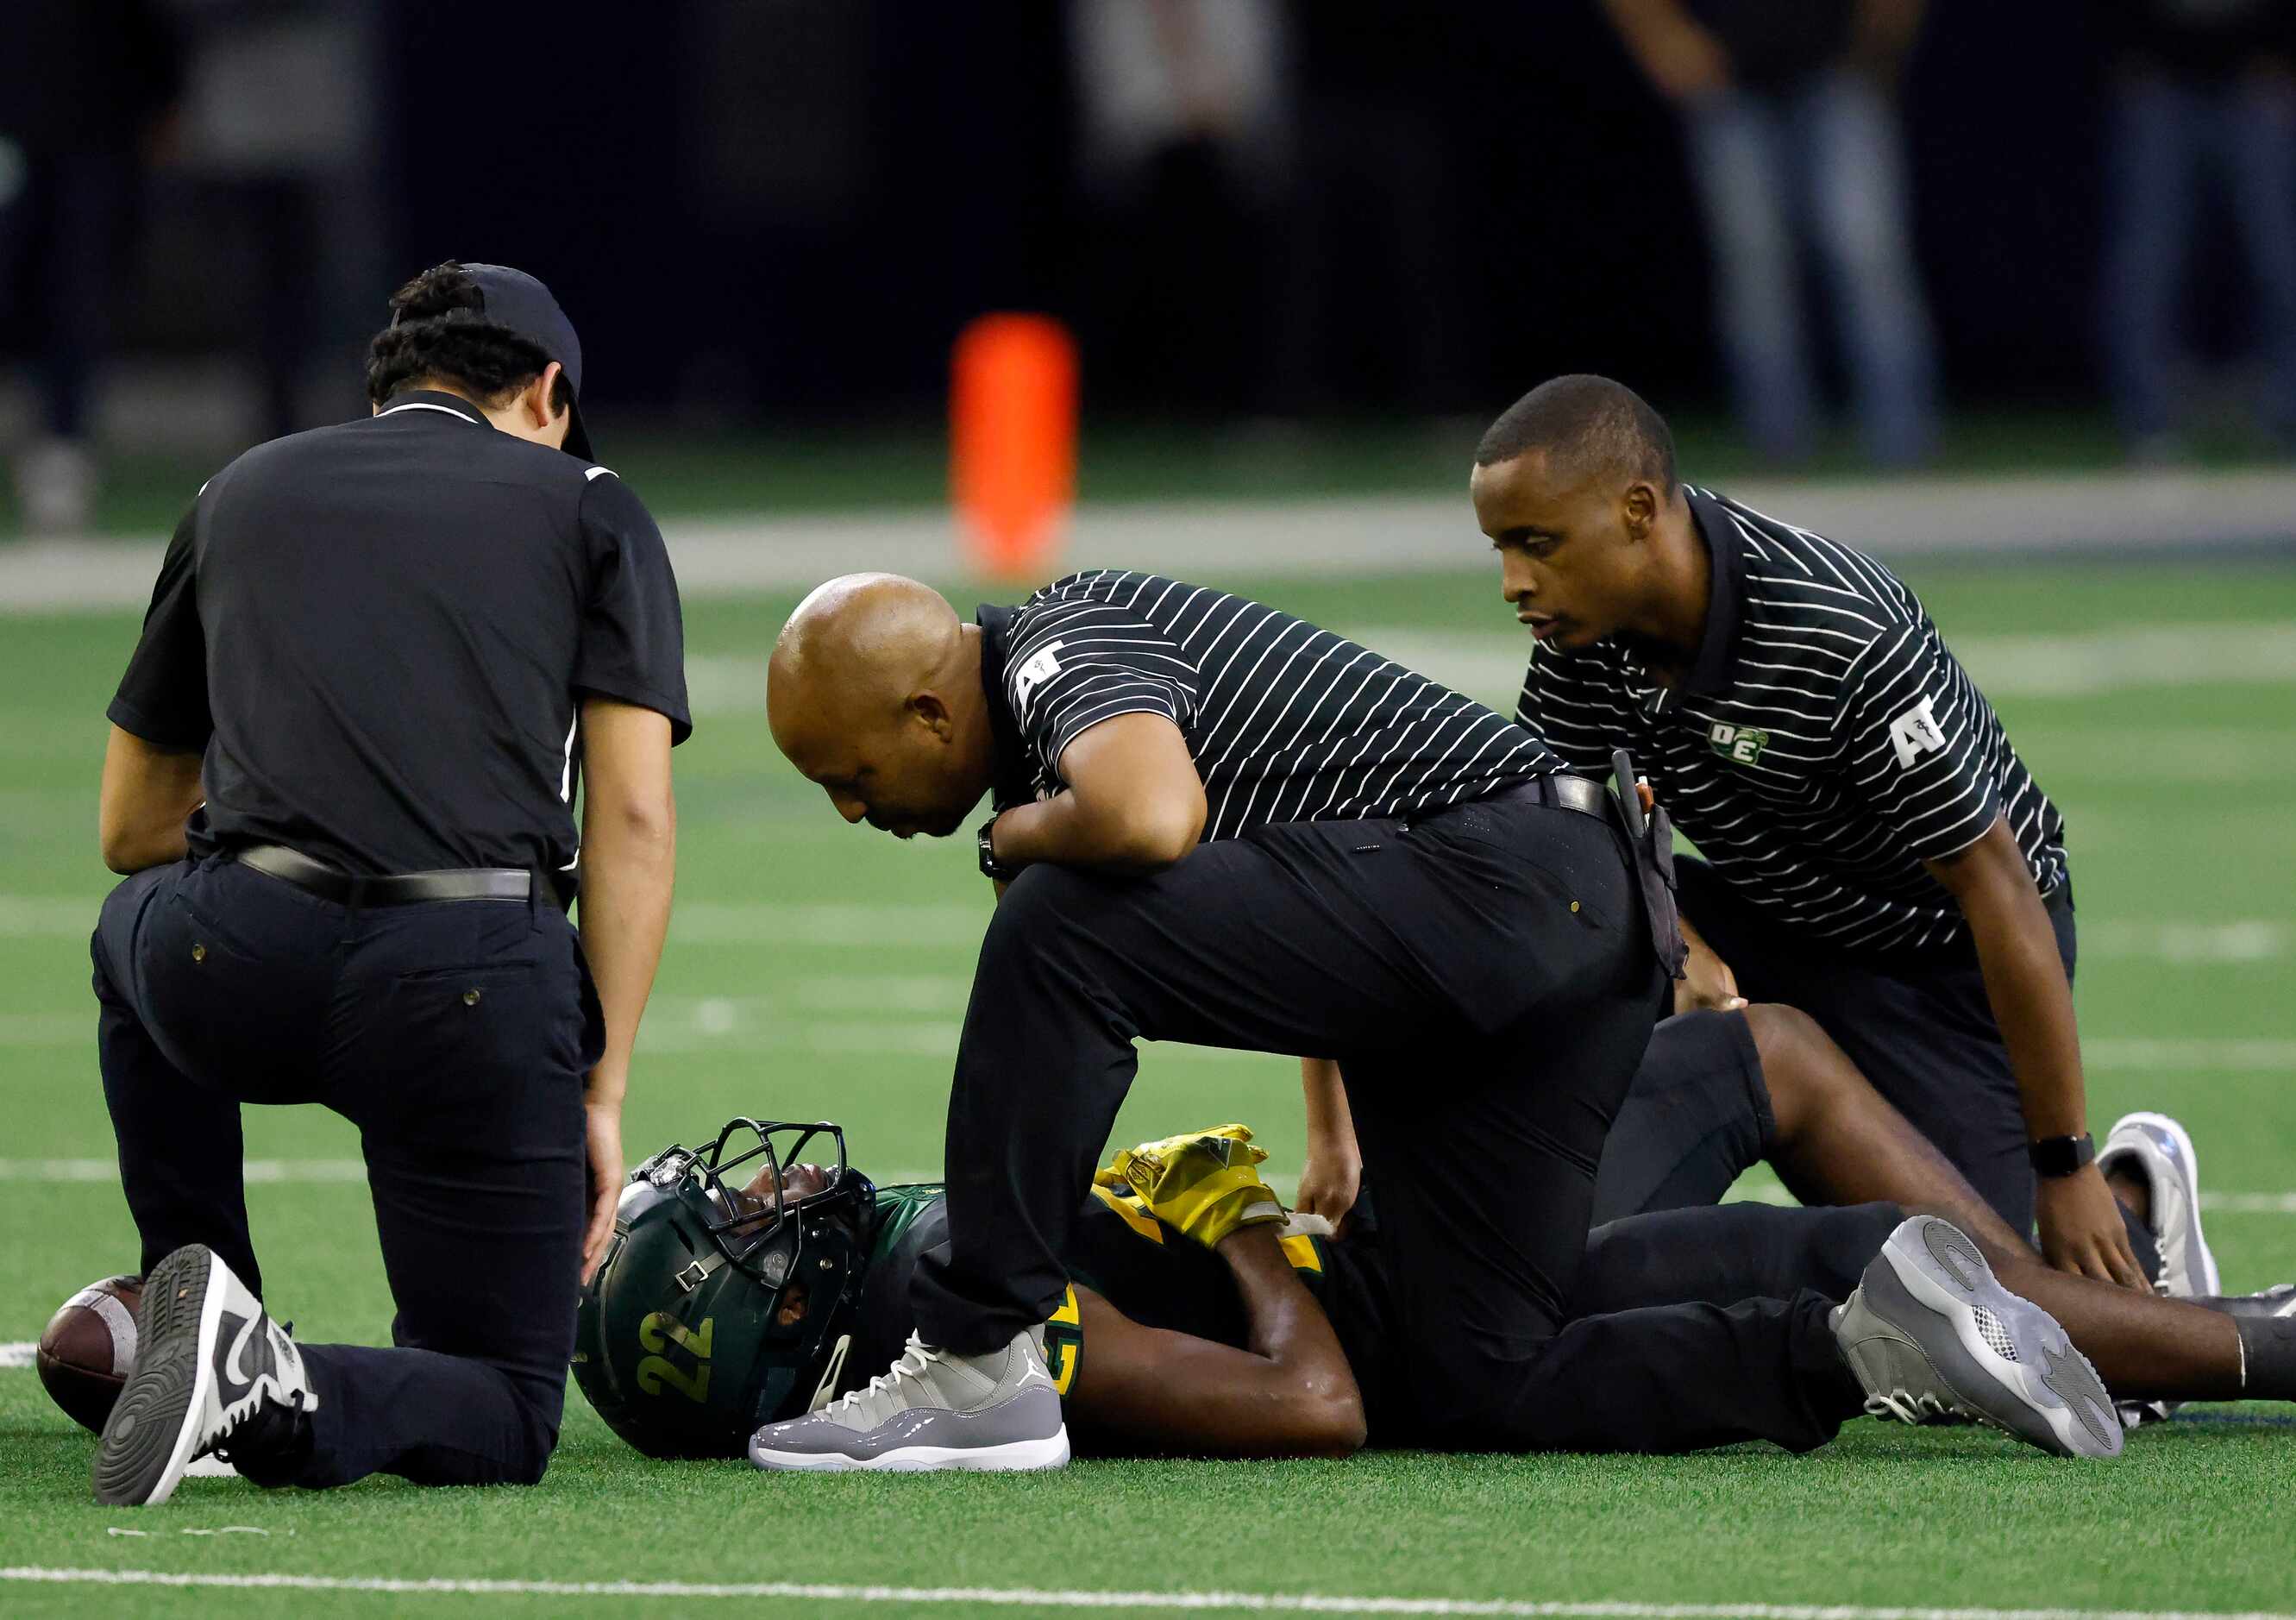 DeSoto running back Deondrae Riden Jr. (22) is attended to by athletic trainers after...